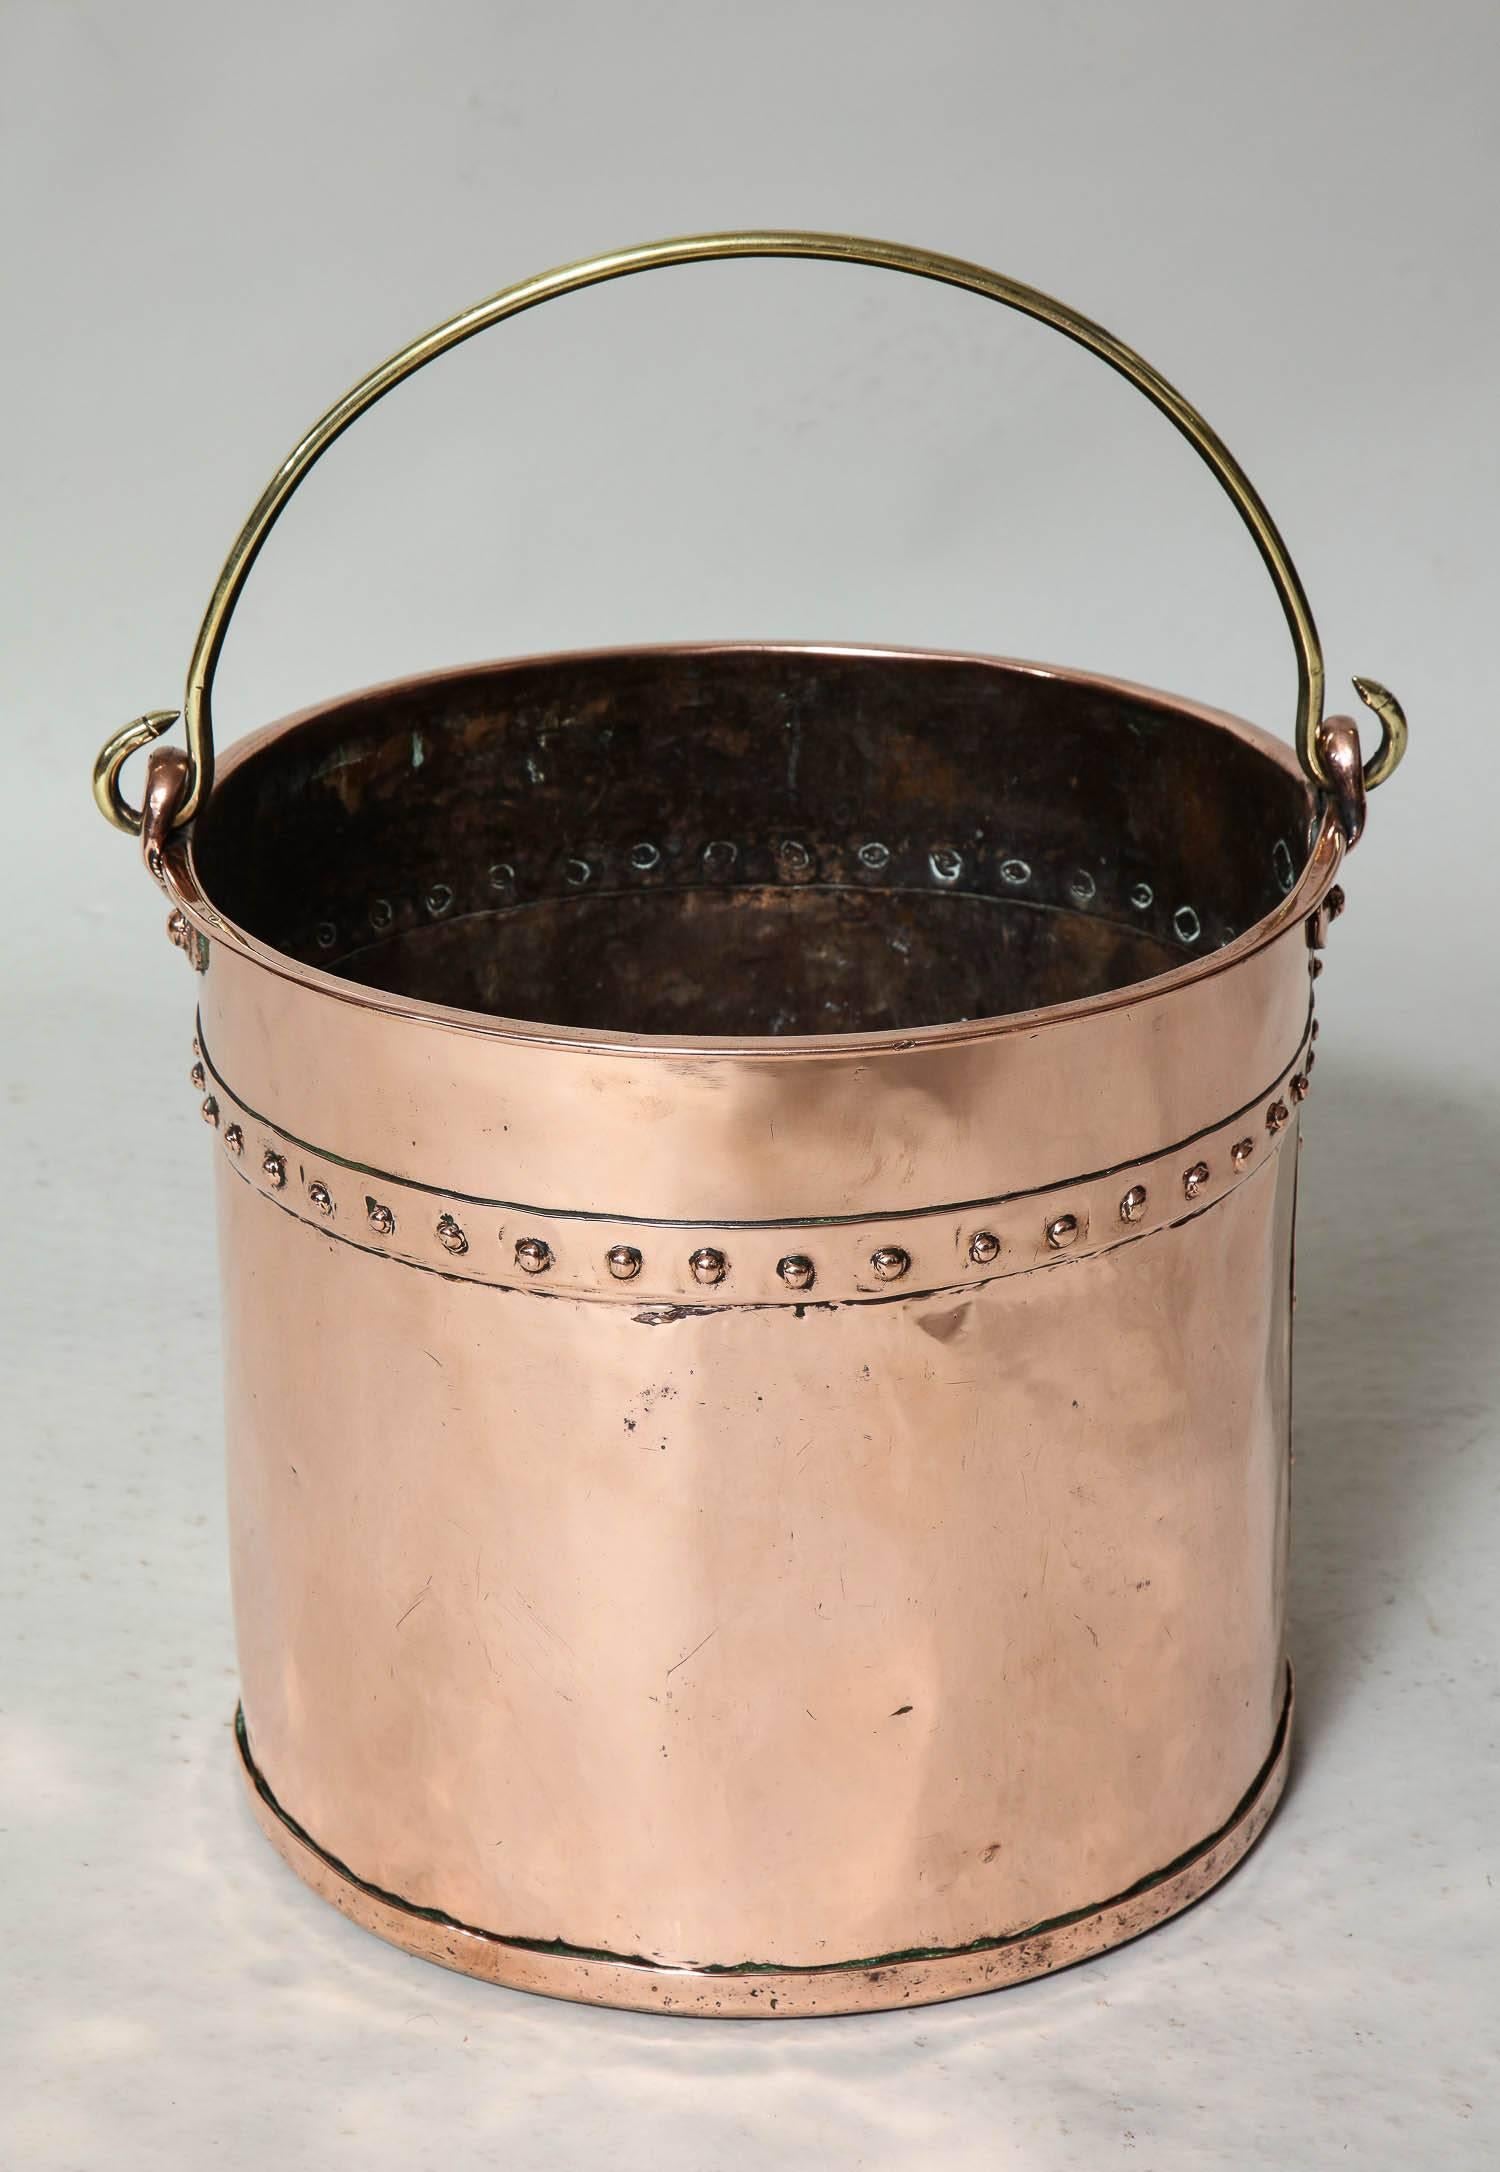 Great Britain (UK) English Riveted Copper Bucket